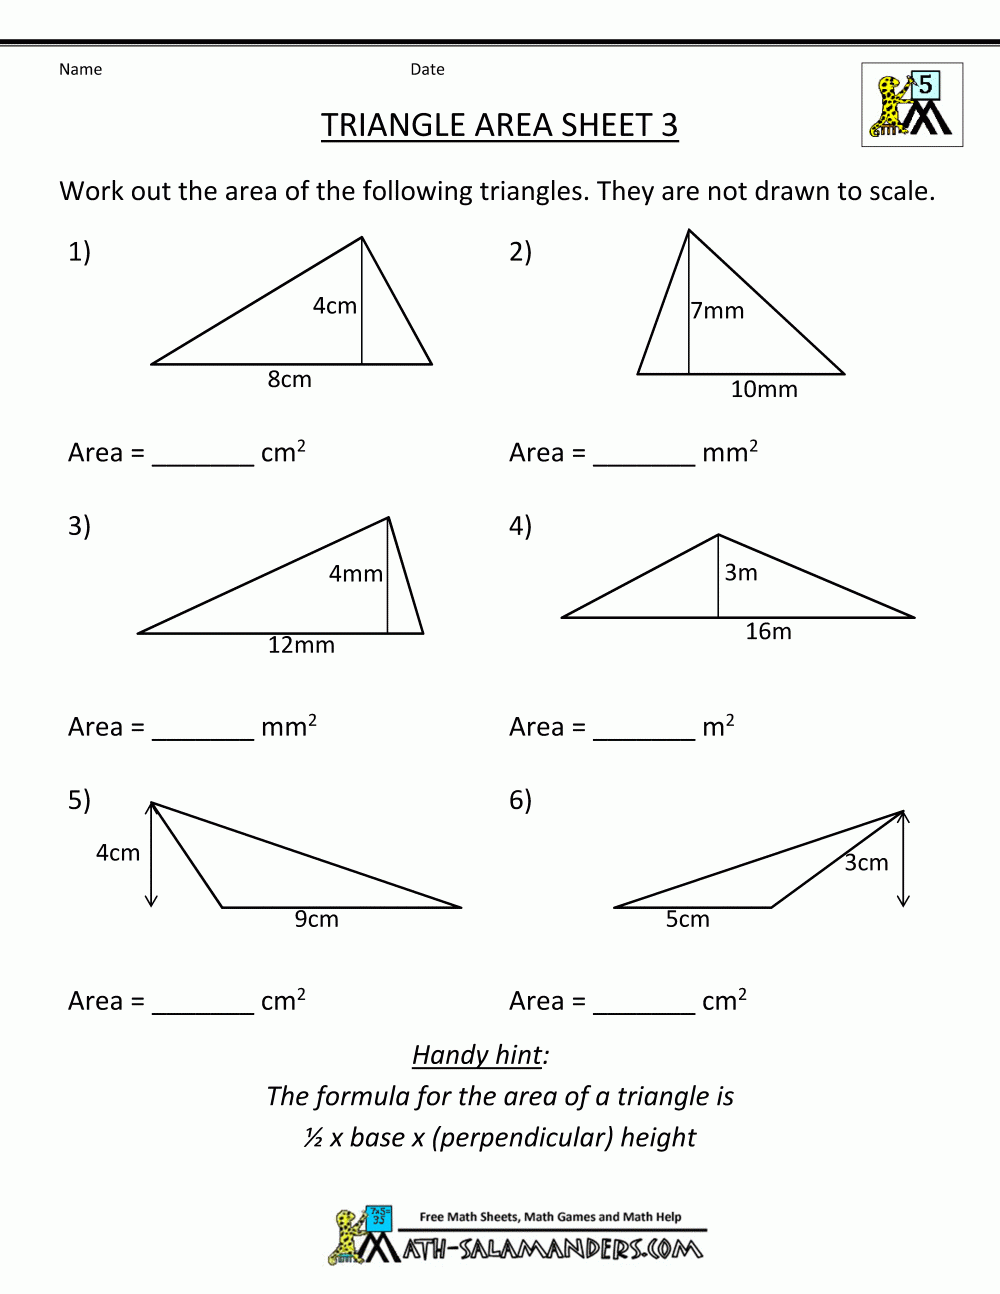 Area worksheets triangle area 3 gif 1000 1294 Triangle Worksheet 